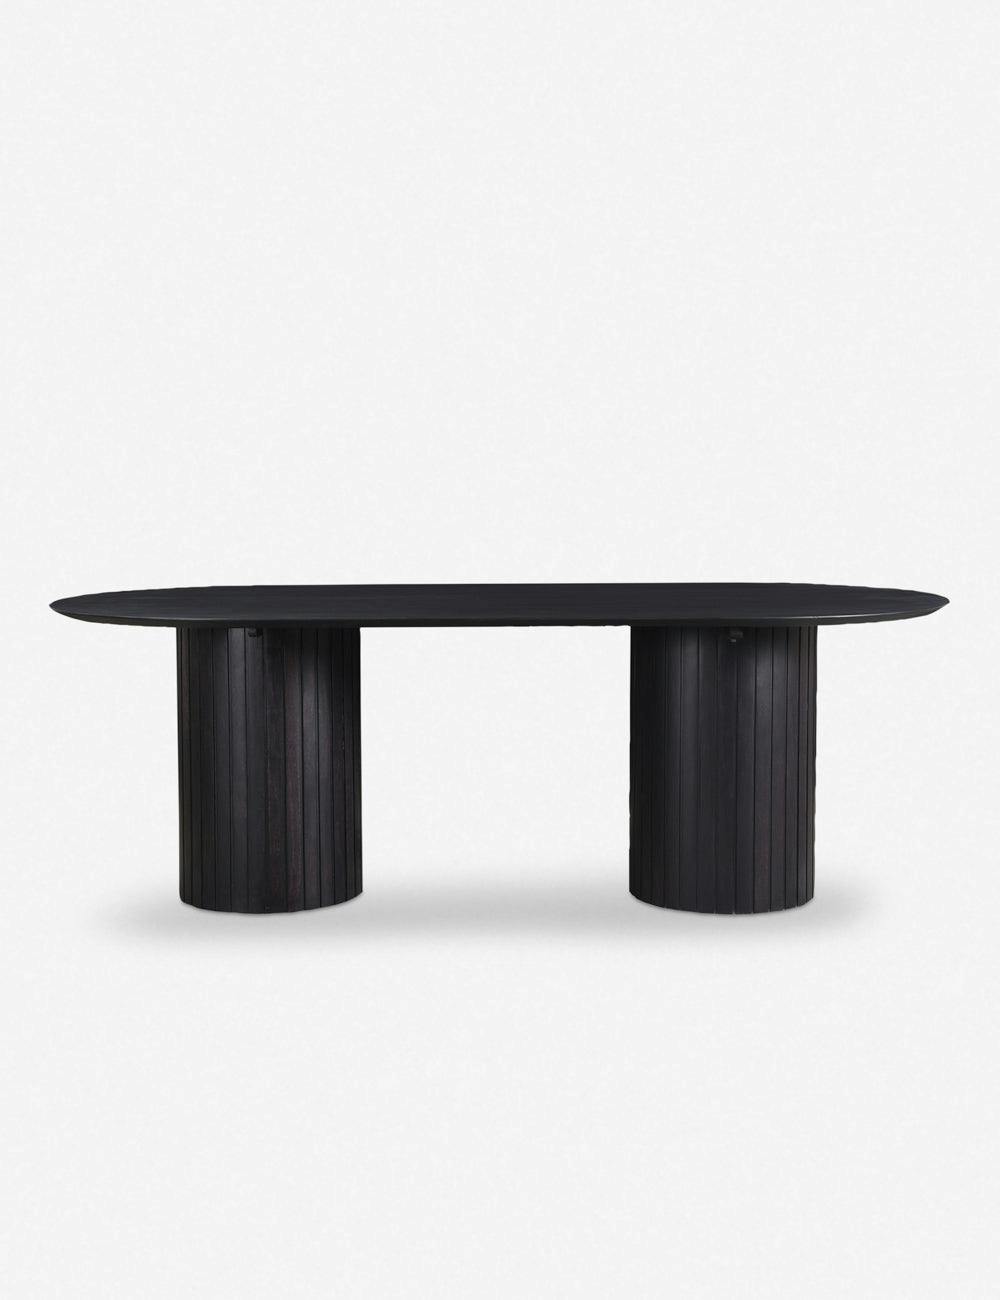 Benedict 86"W Black Oval Acacia Wood Dining Table